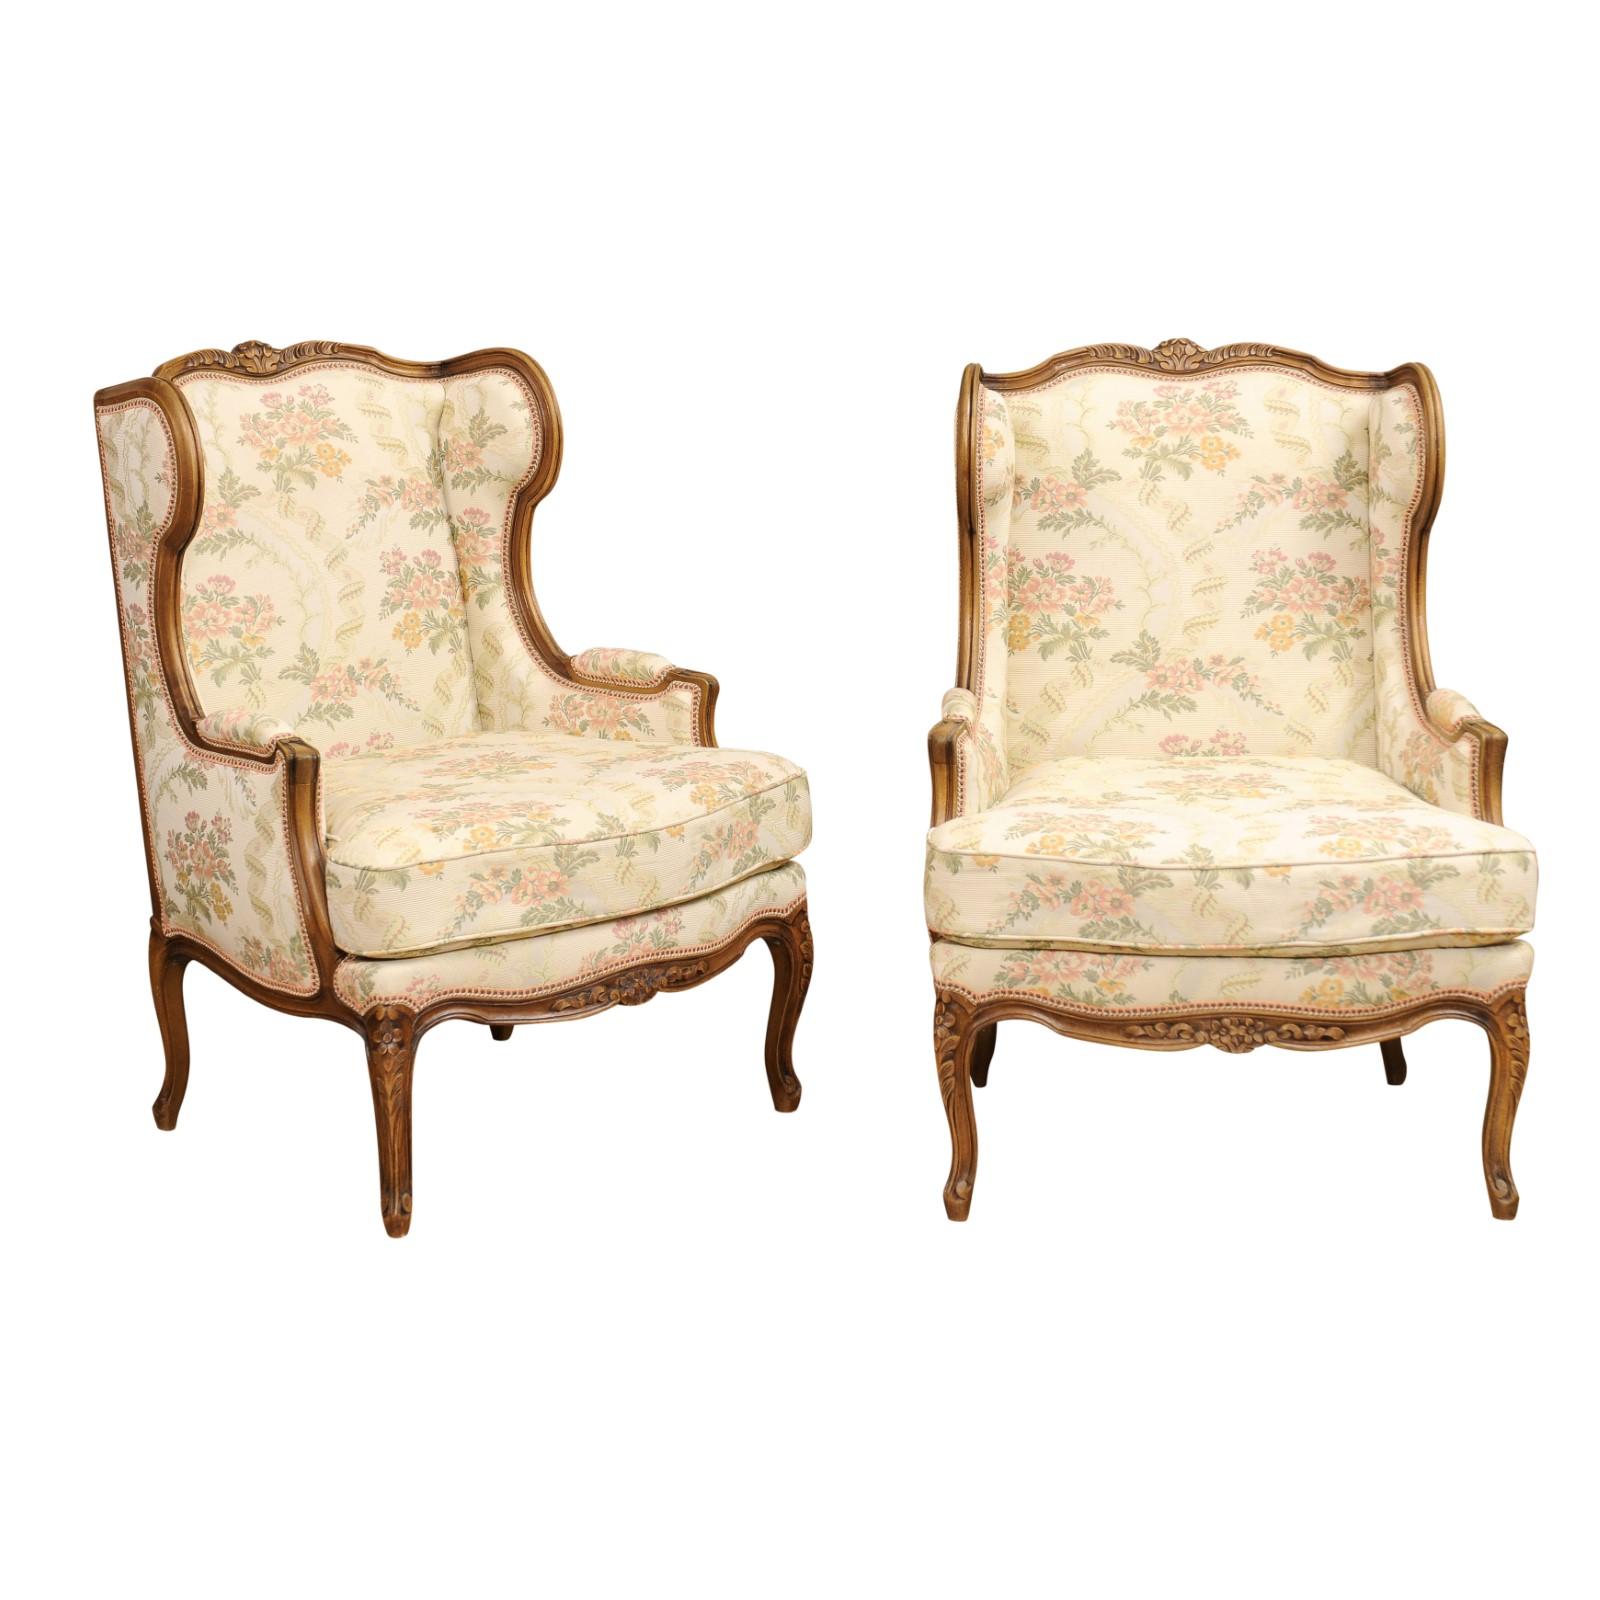 A pair of French Louis XV style walnut bergères à oreilles from the 20th century, with carved floral décor, upholstery and cabriole legs. Created in France during the 20th century, this pair of wingback bergères, called bergères à oreilles in